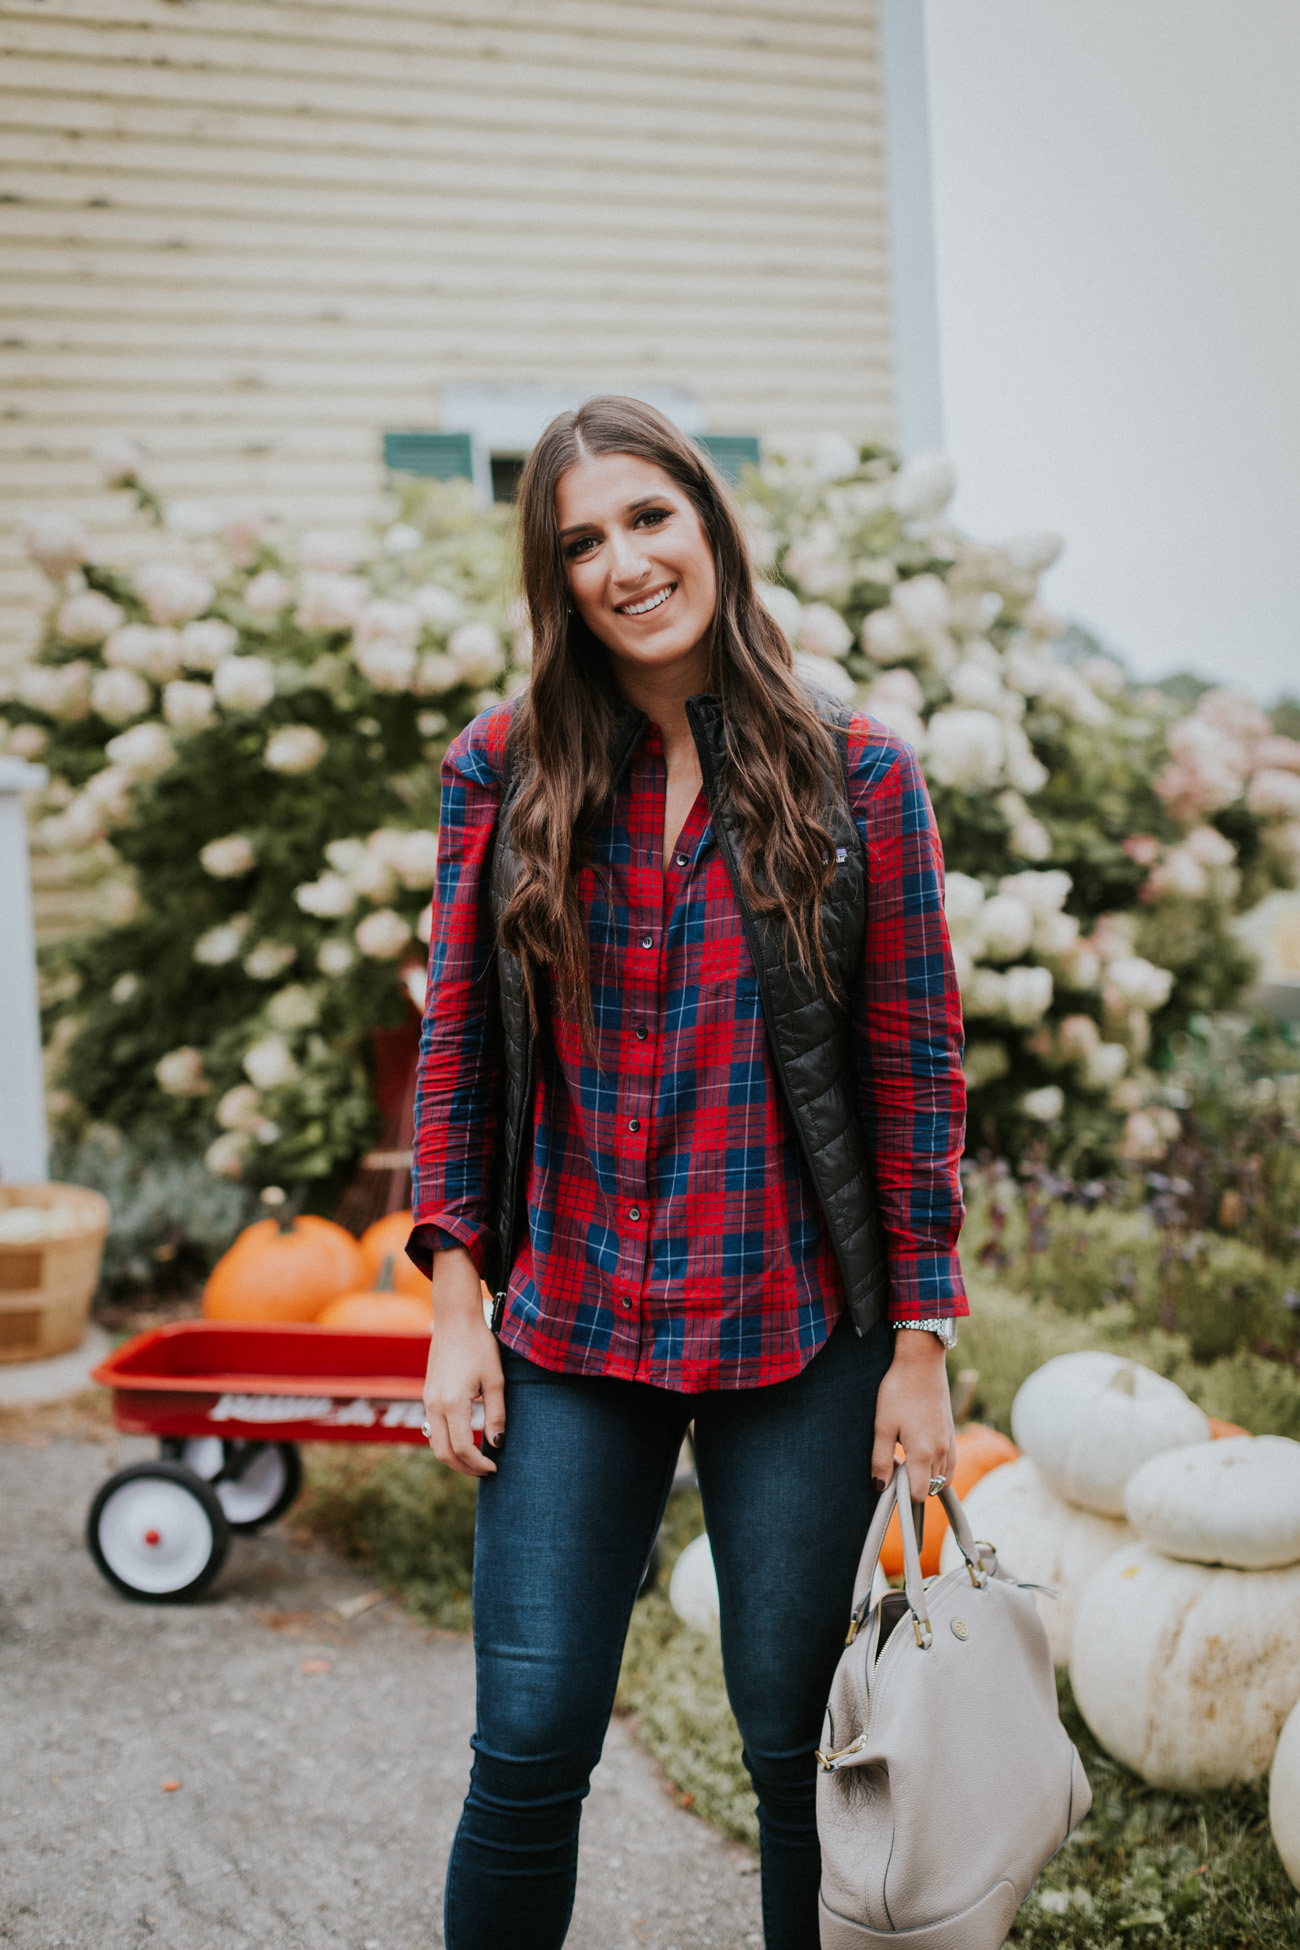 pumpkin patch outfit, sperry duckboots, new hampshire pumpkin patch, fall outfit ideas, fall fashion, patagonia nano puff vest, bean boots, duck boots, tory burch purse, new england outfit, preppy fall outfit // grace wainwright a southern drawl